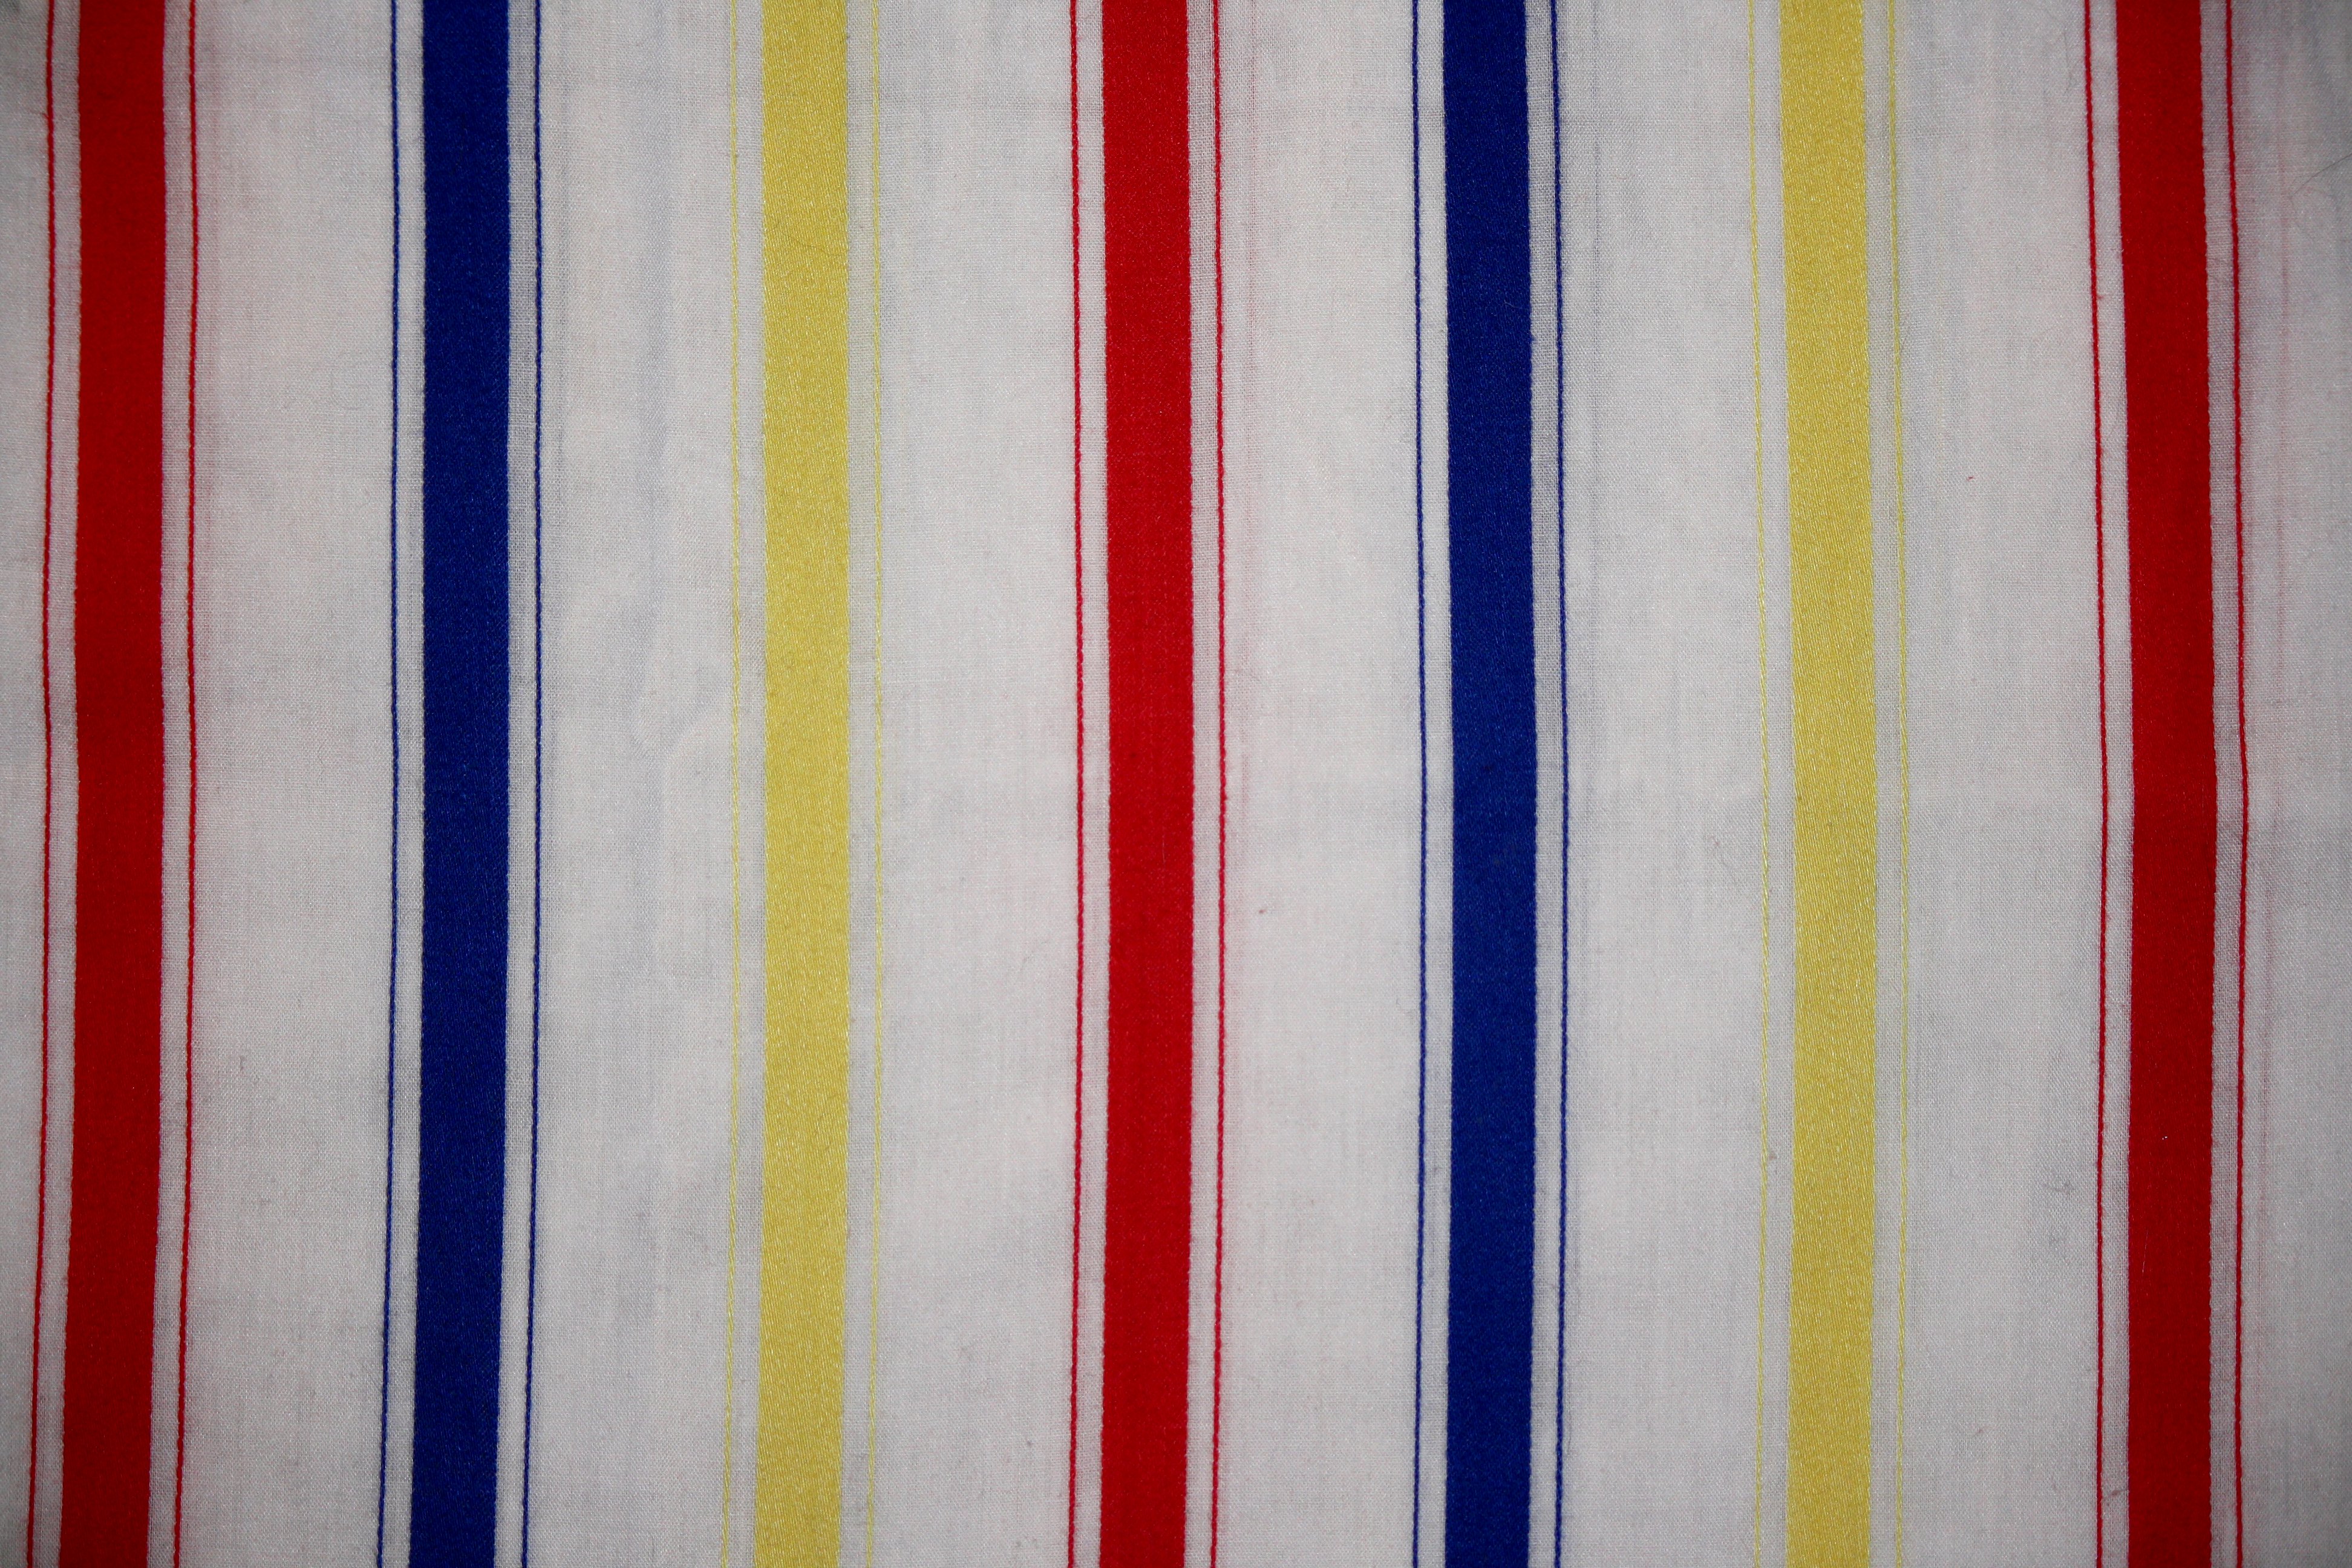 Striped Fabric Texture Red Blue And Yellow On White